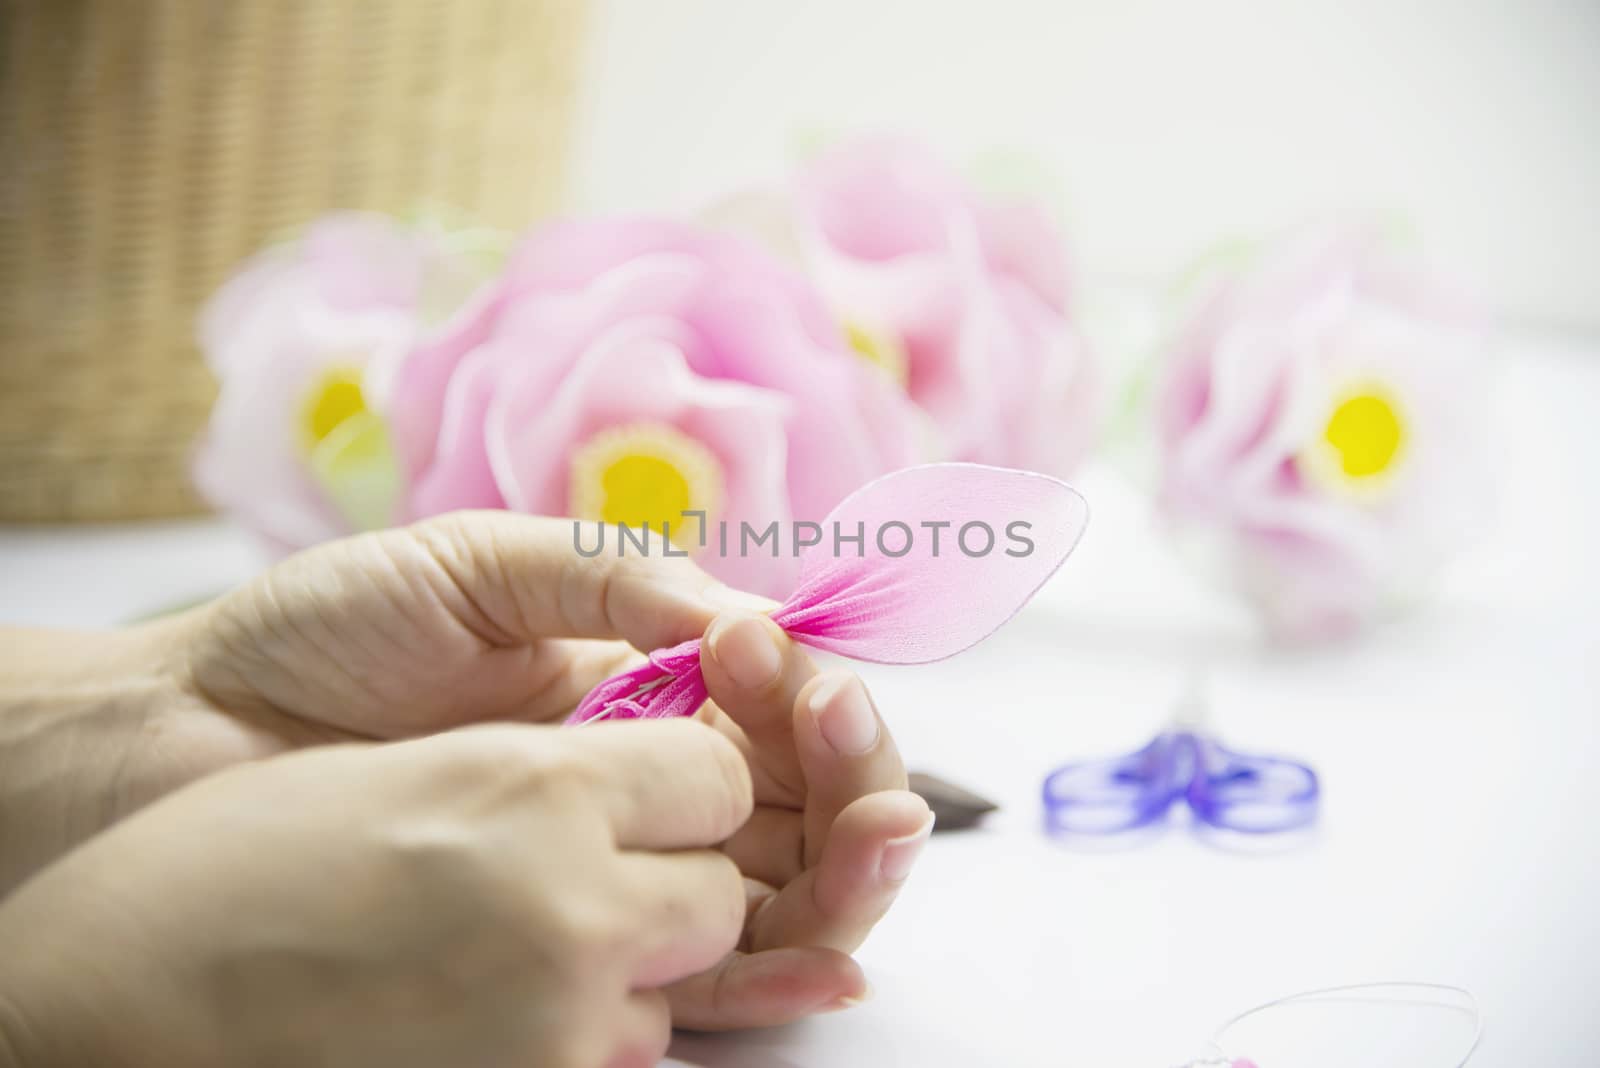 Woman making beautiful nylon flower - people with DIY handmade flower concept by pairhandmade